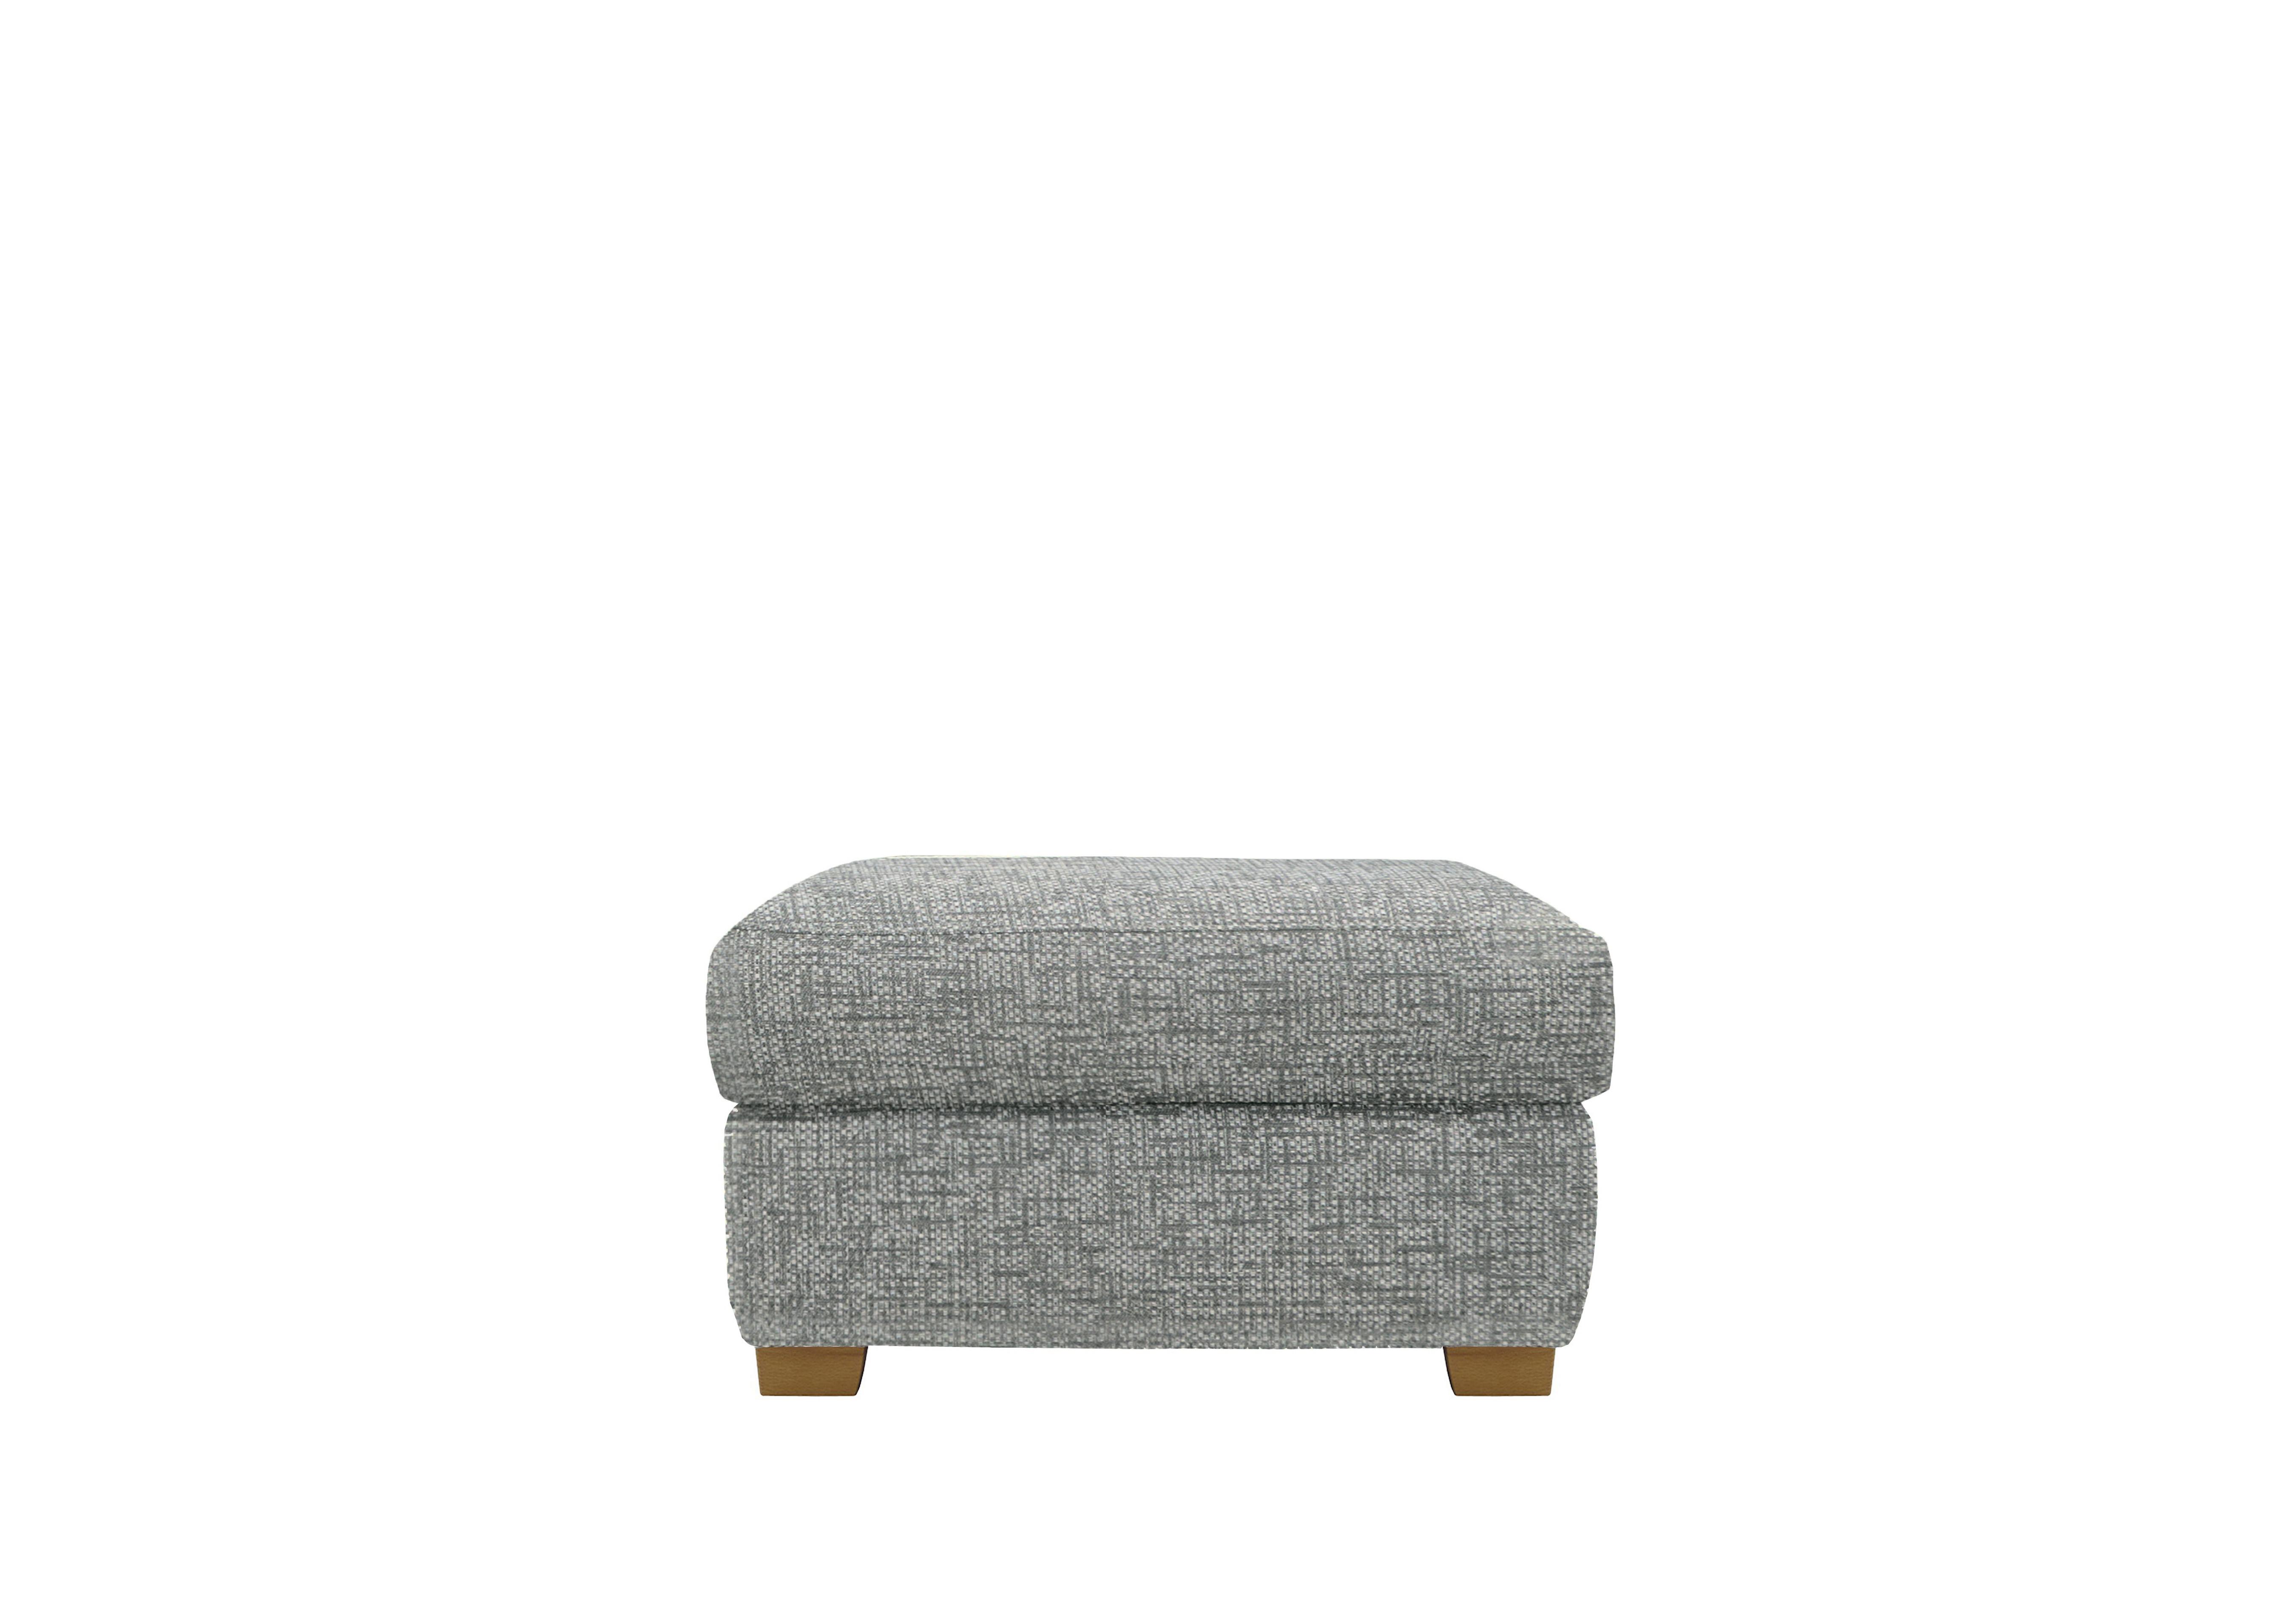 Seattle Fabric Footstool with Wooden Feet in B030 Remco Light Grey Ok on Furniture Village